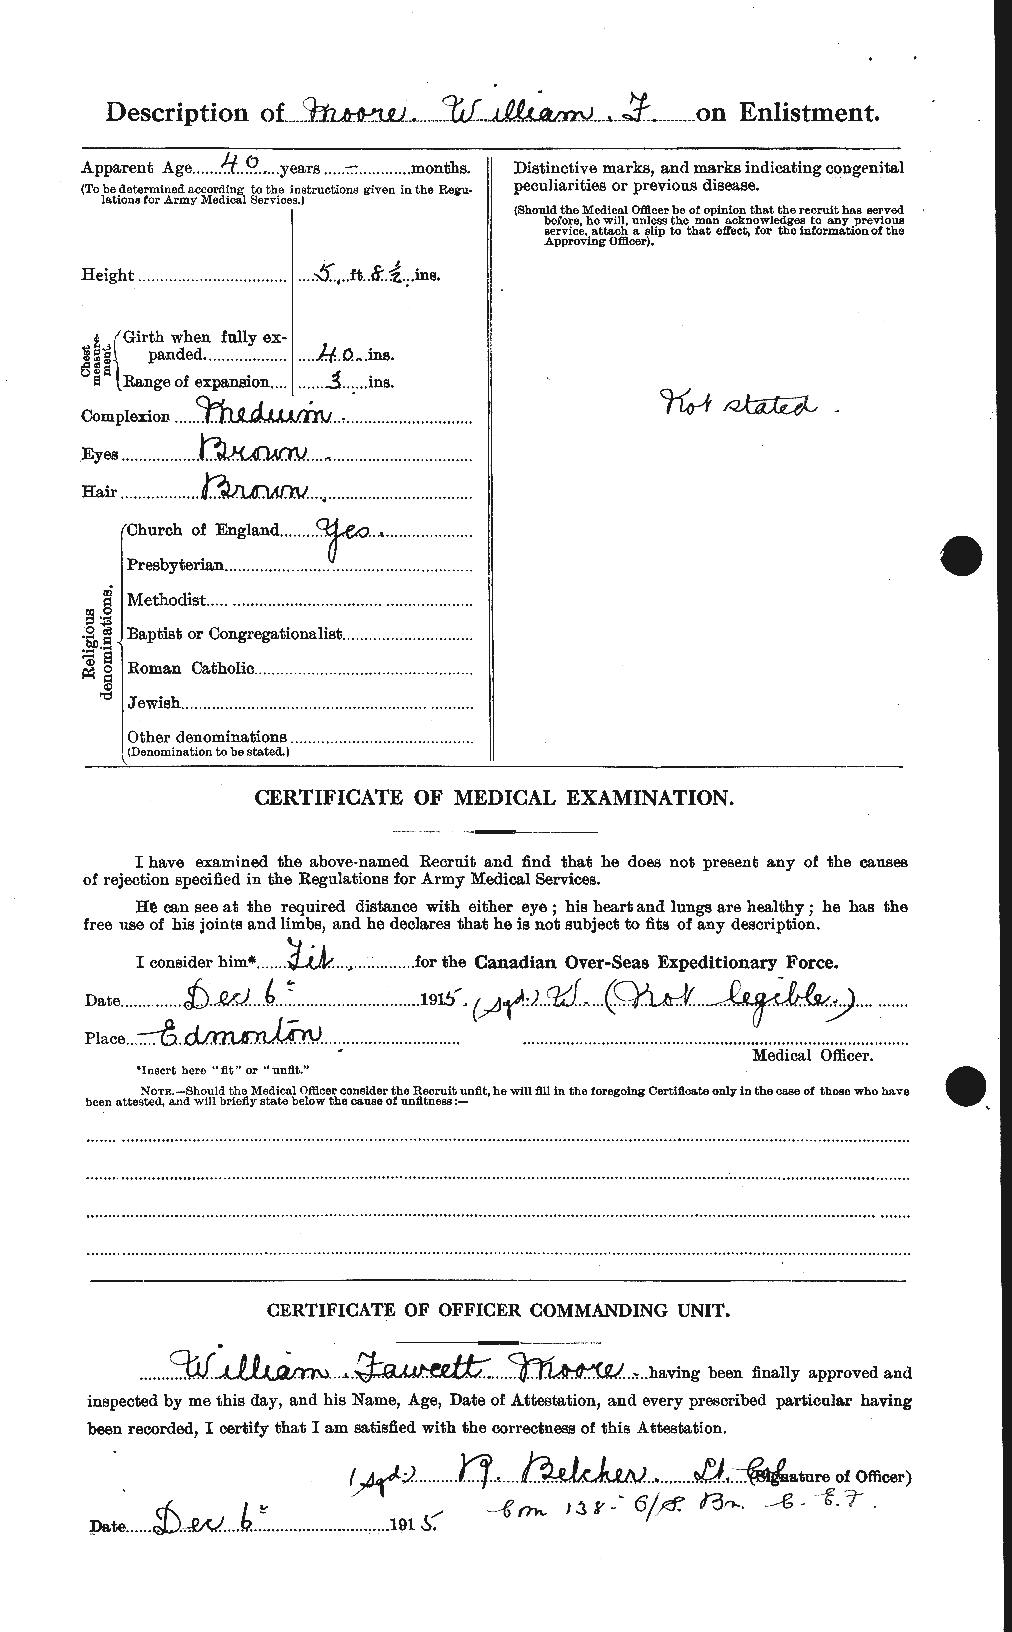 Personnel Records of the First World War - CEF 505800b